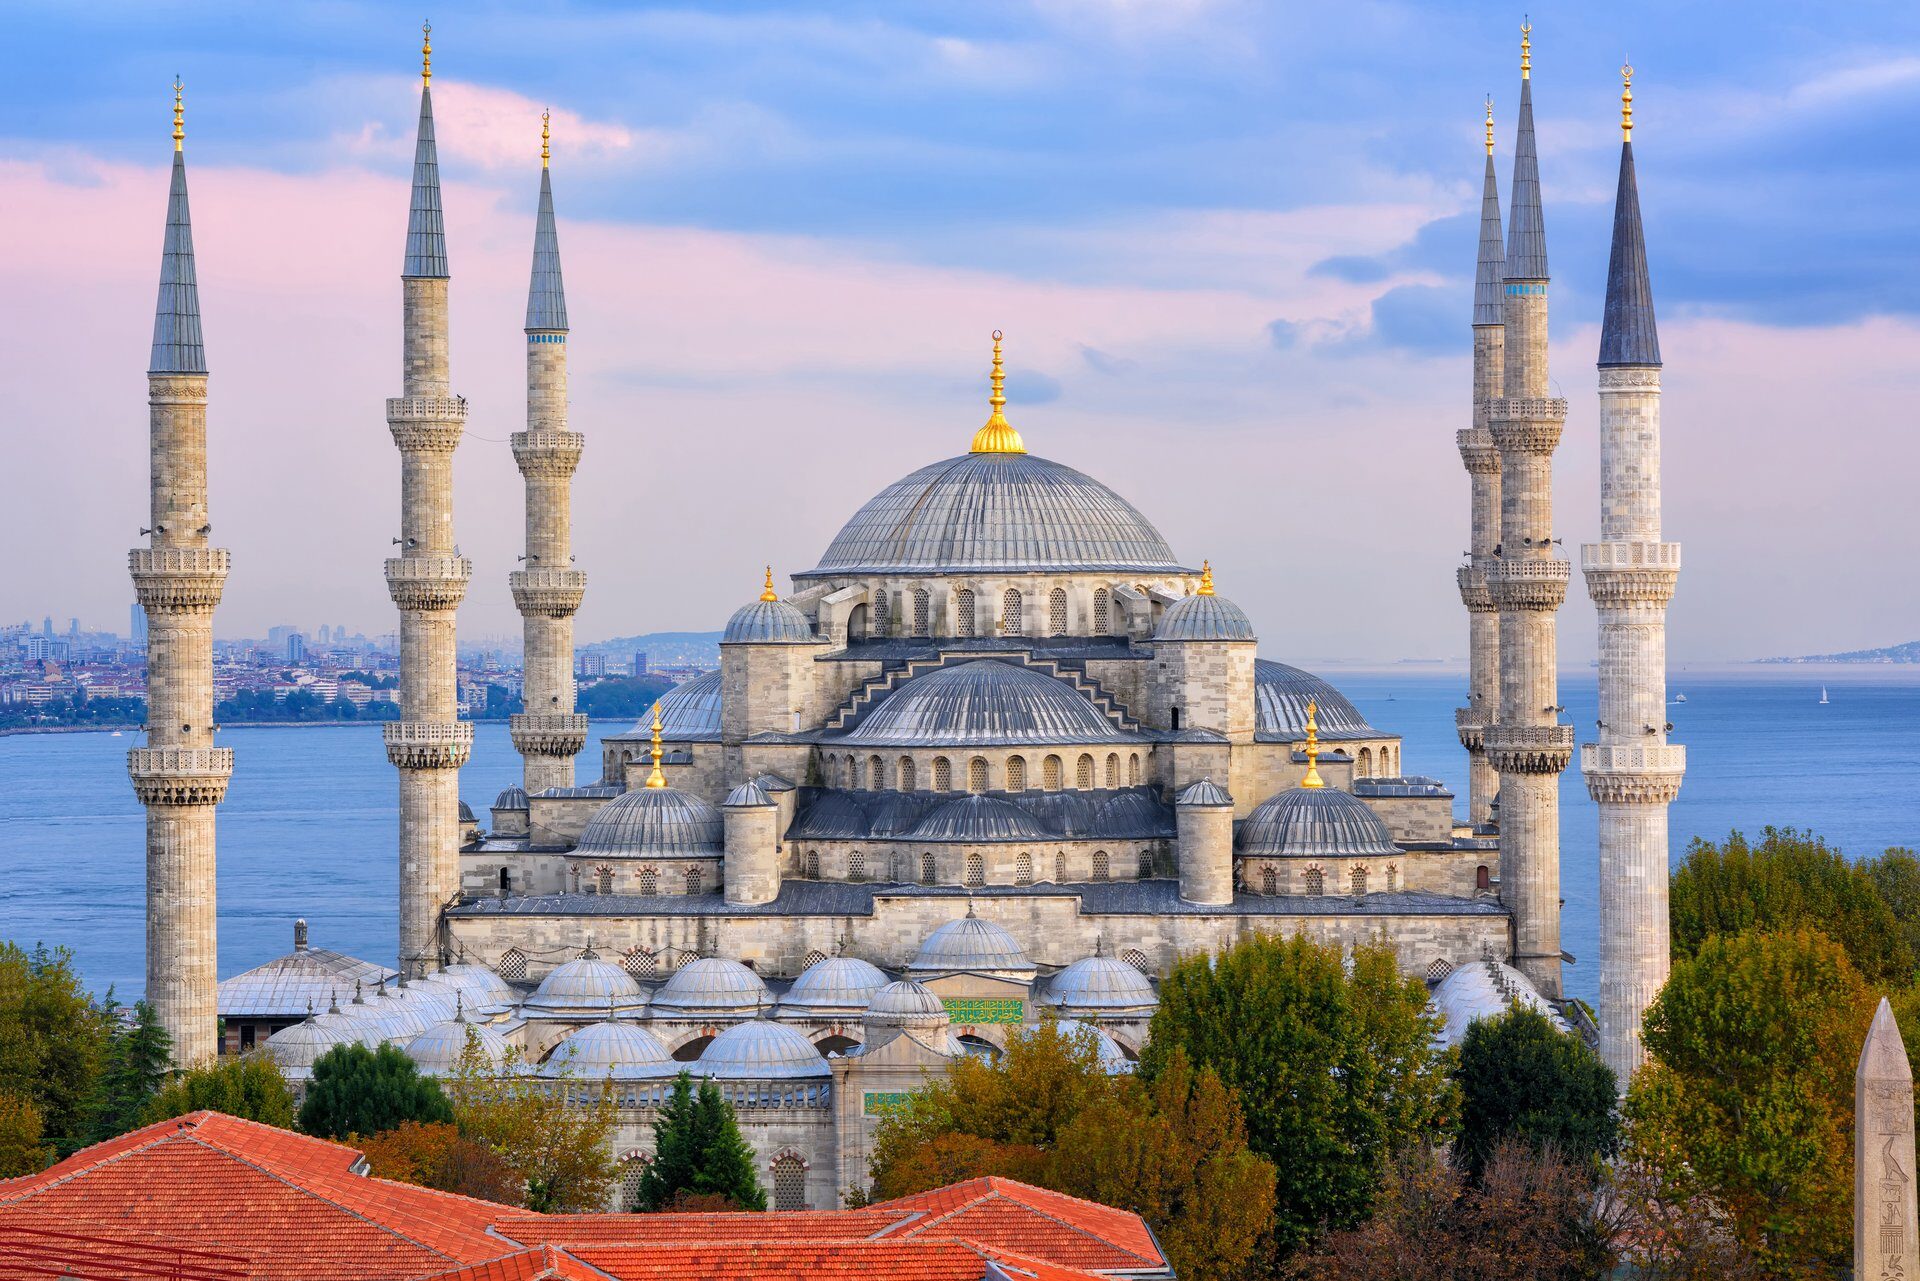 istanbul travel suggestions